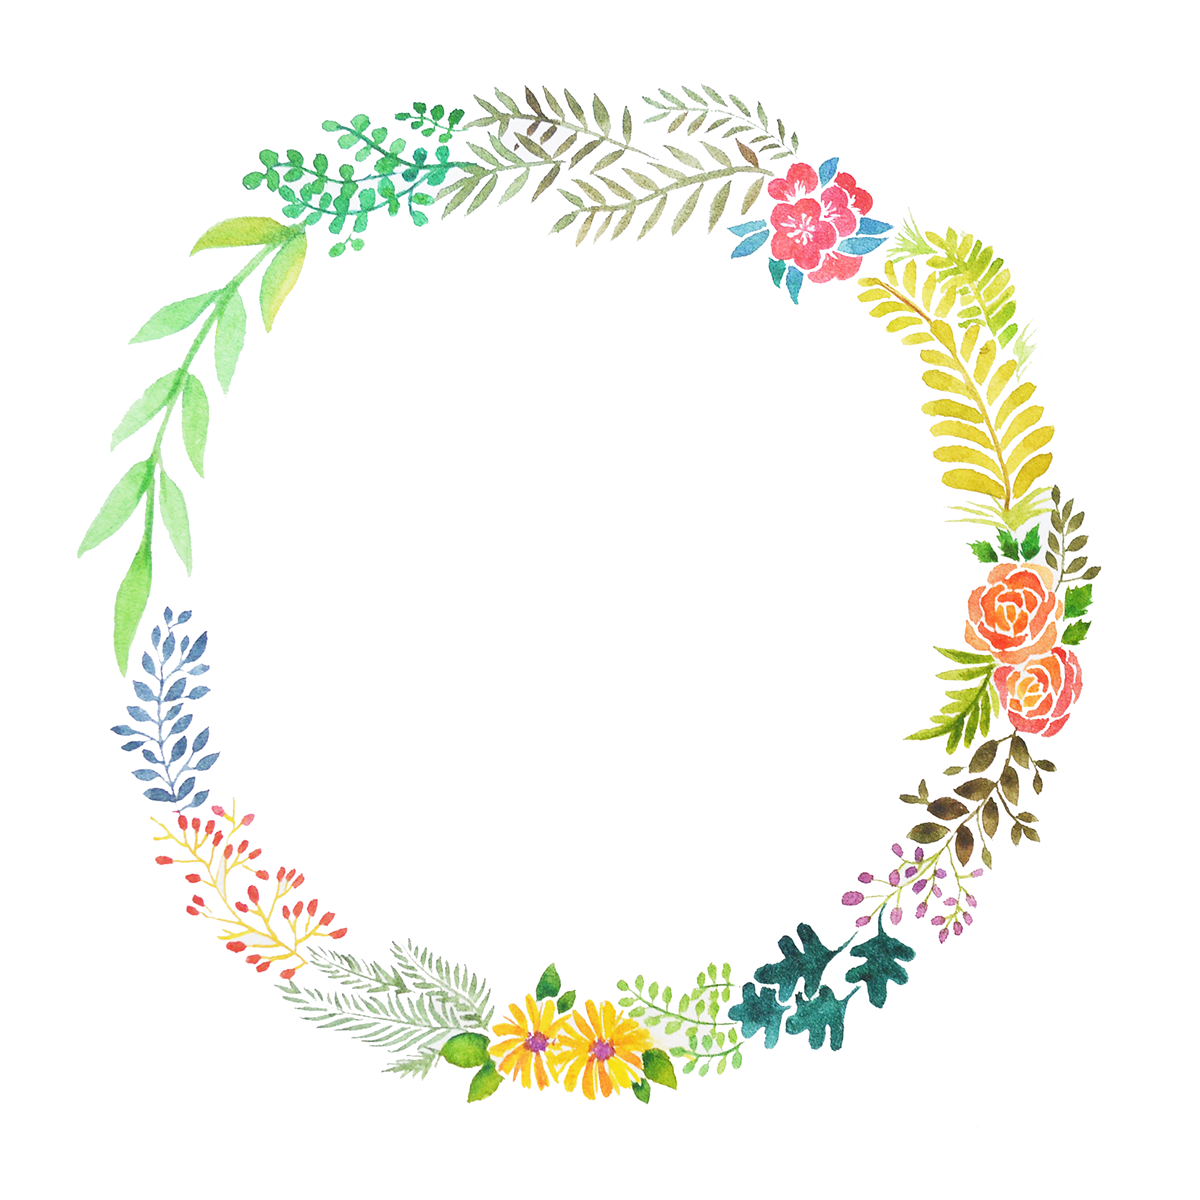 Floral design Flower Wreath Paper Watercolor painting - accumulated png ...